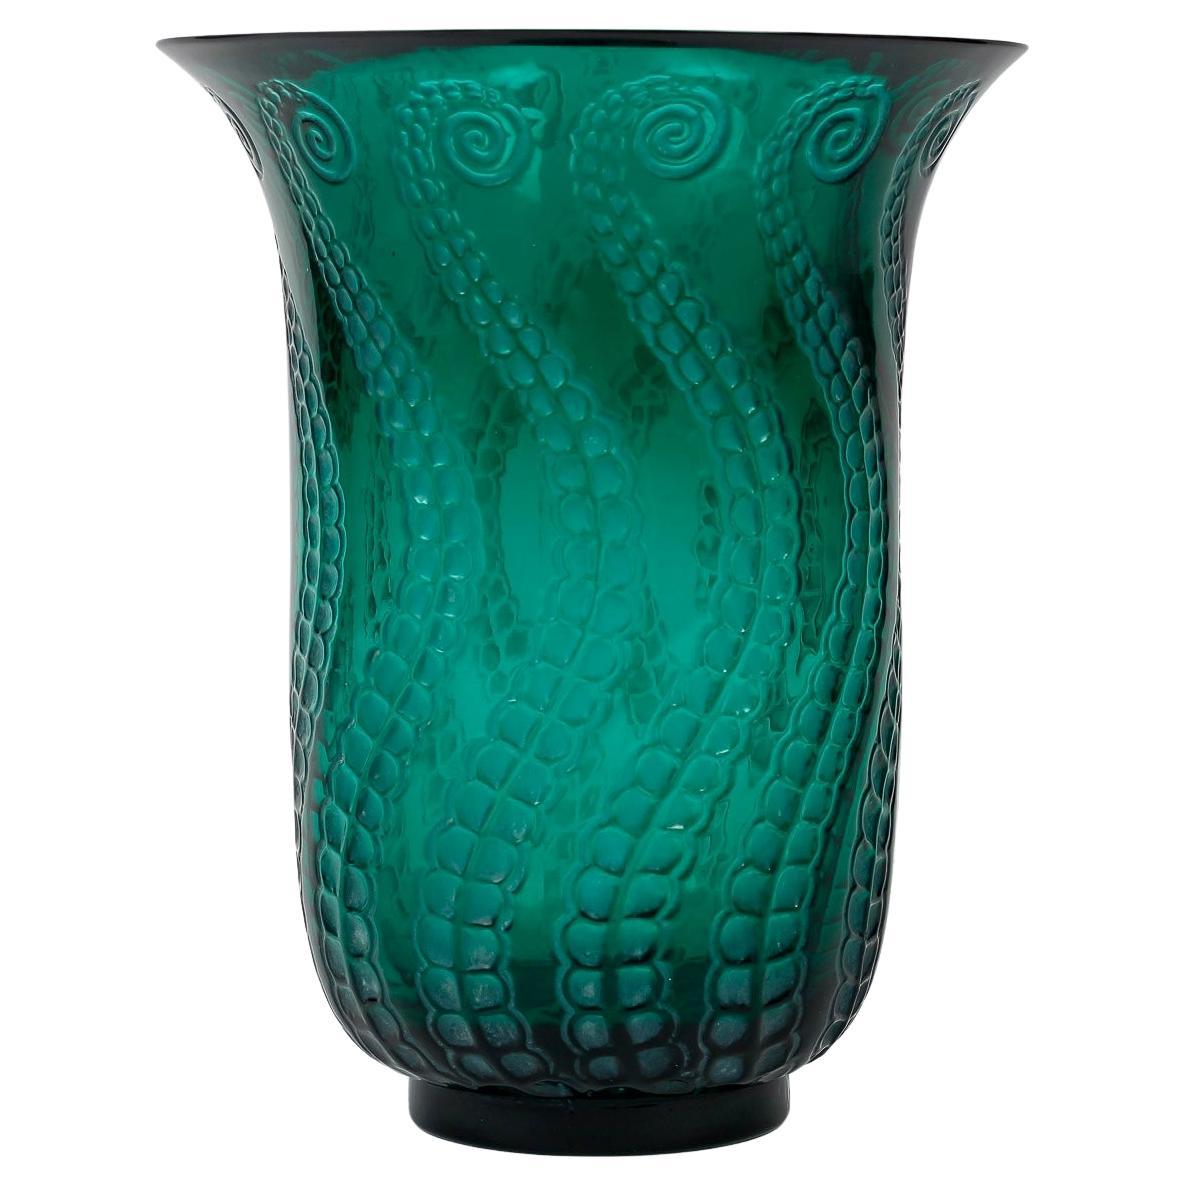 1921 Rene Lalique Vase Meduse Emerald Green Glass with White Patina